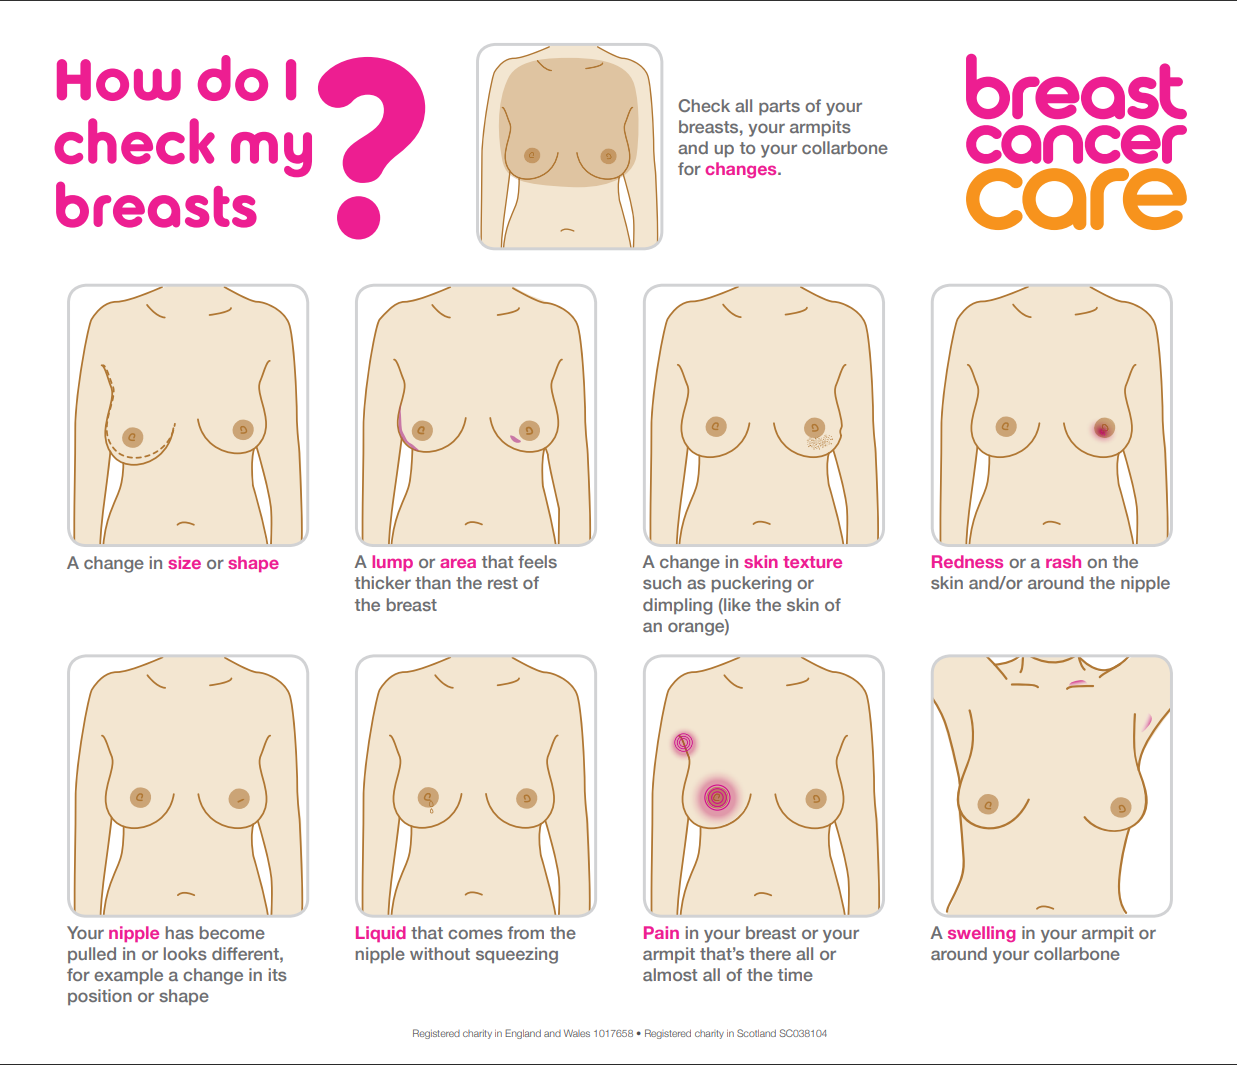 nhs.uk - It's Breast Cancer Awareness Month. Breast cancer can